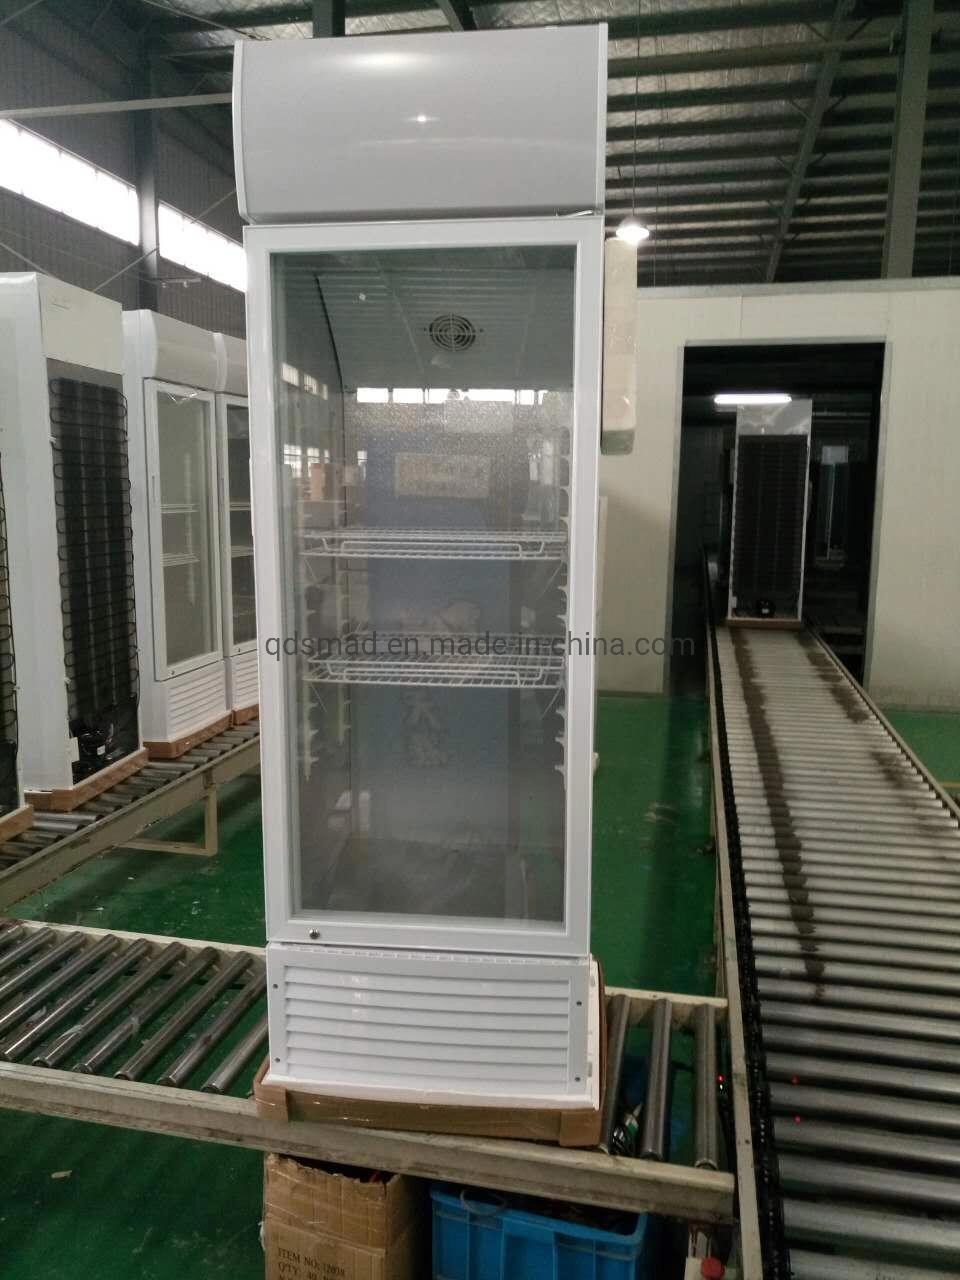 Stand Glass Display Cold Chiller Refrigerator Beer Showcase